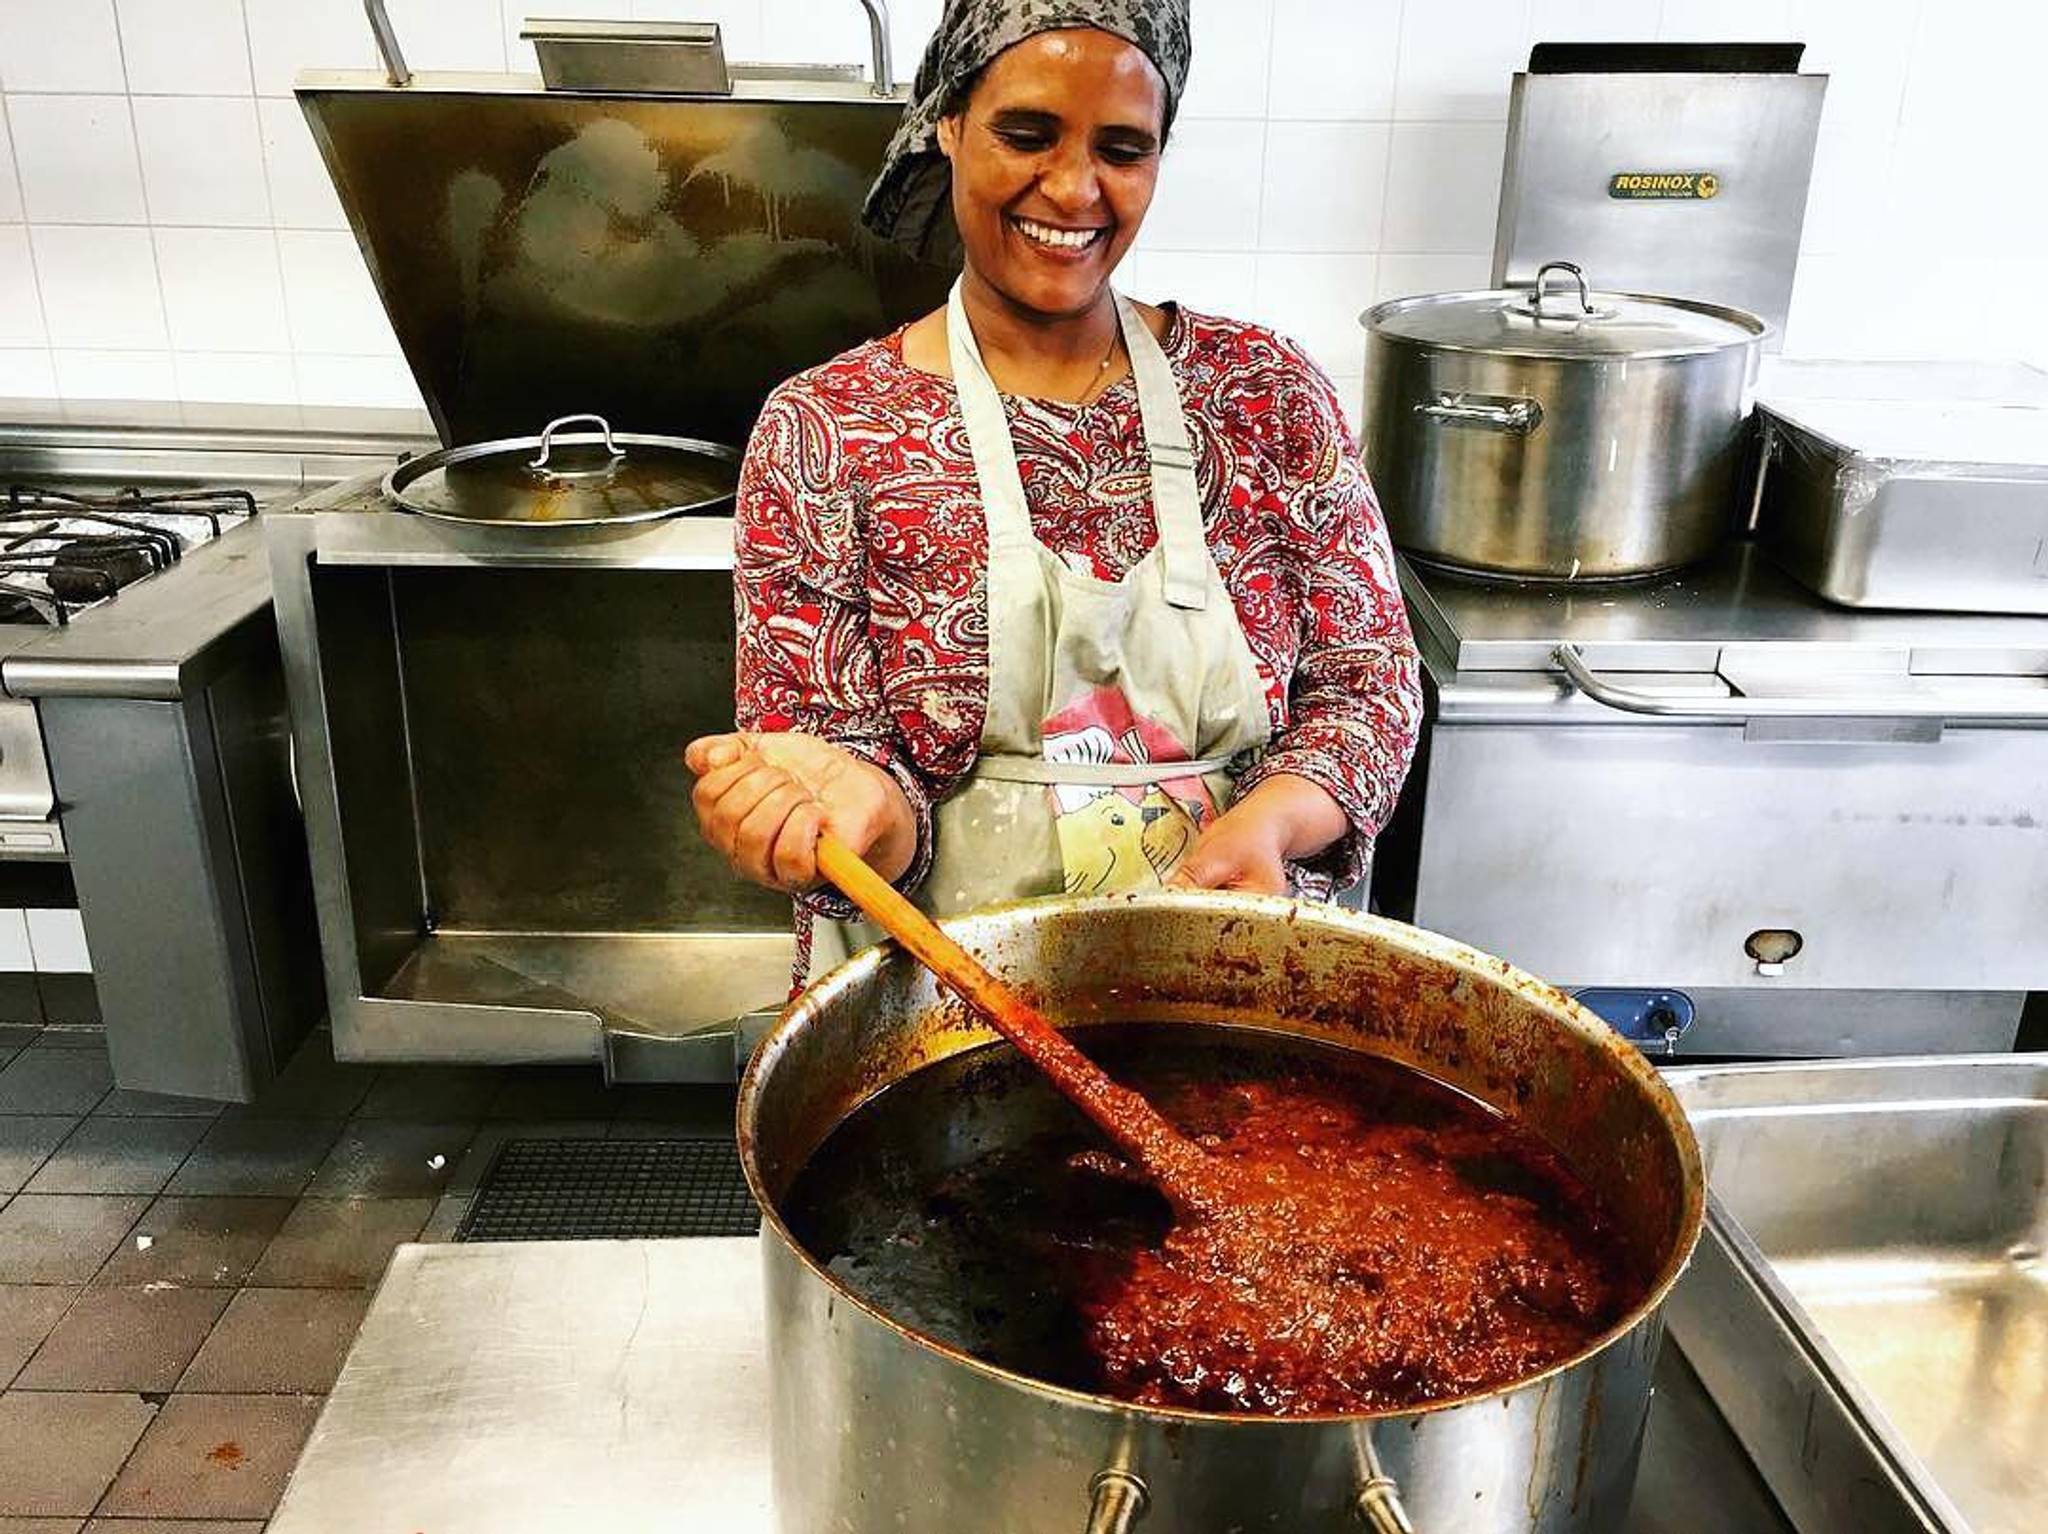 Immigrant cooks introduce refugee culture to France